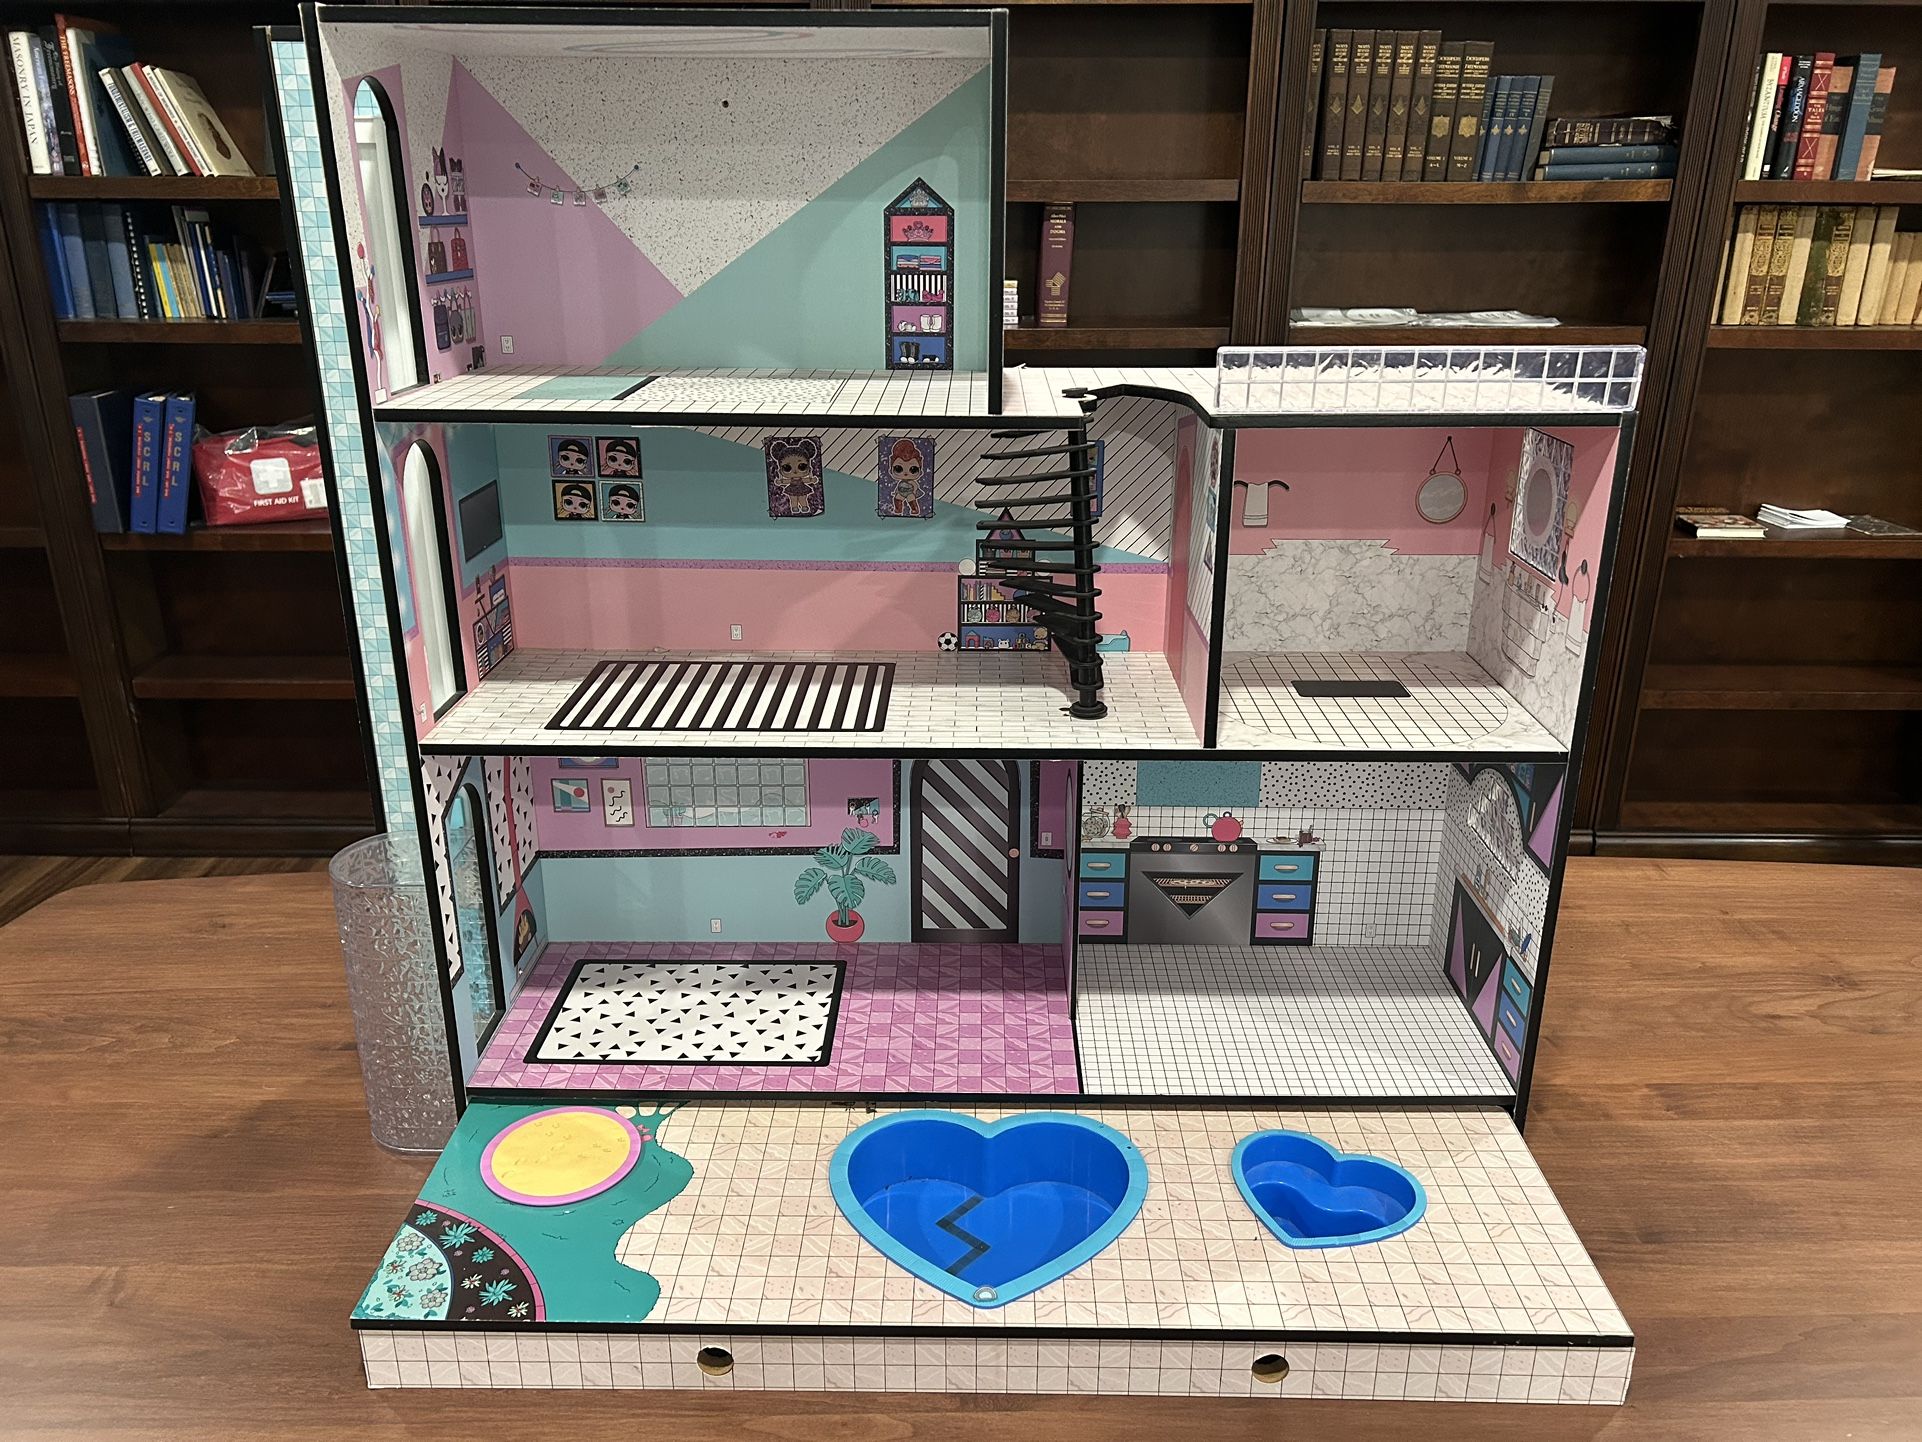 LOL Surprise! Doll house And Accessories 